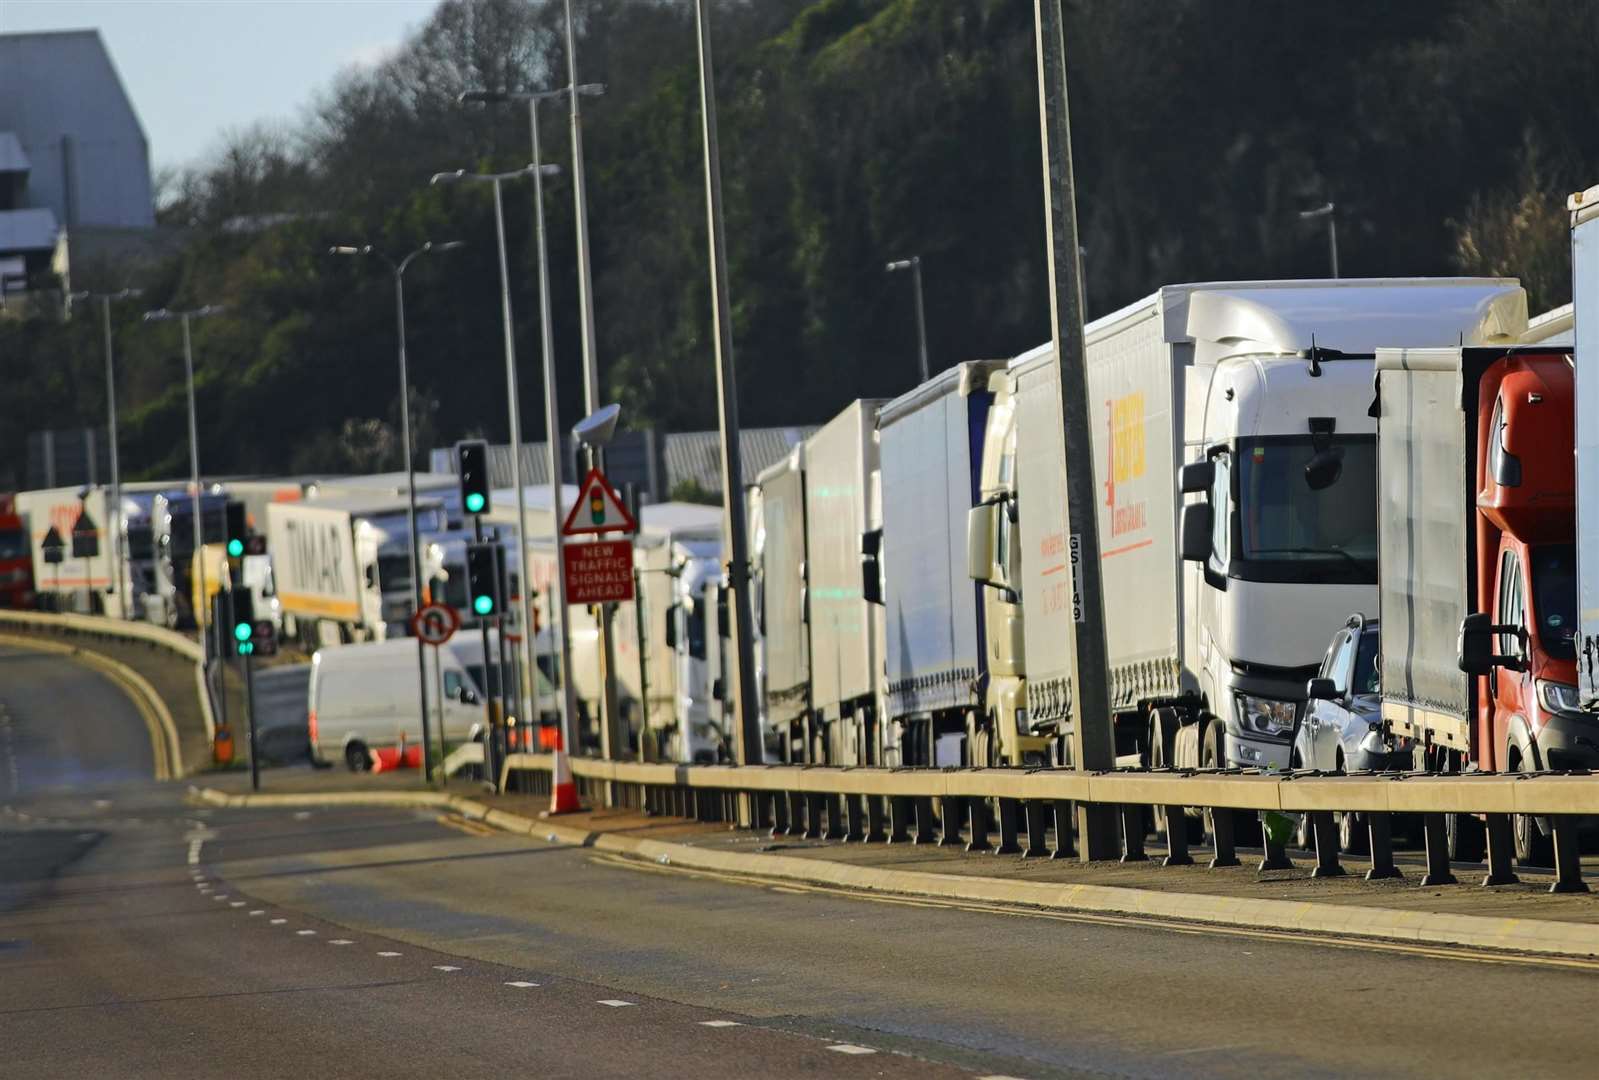 The army was drafted in to help ease freight lorry queues to enter the Port of Dover. Picture: Aaron Chown/PA